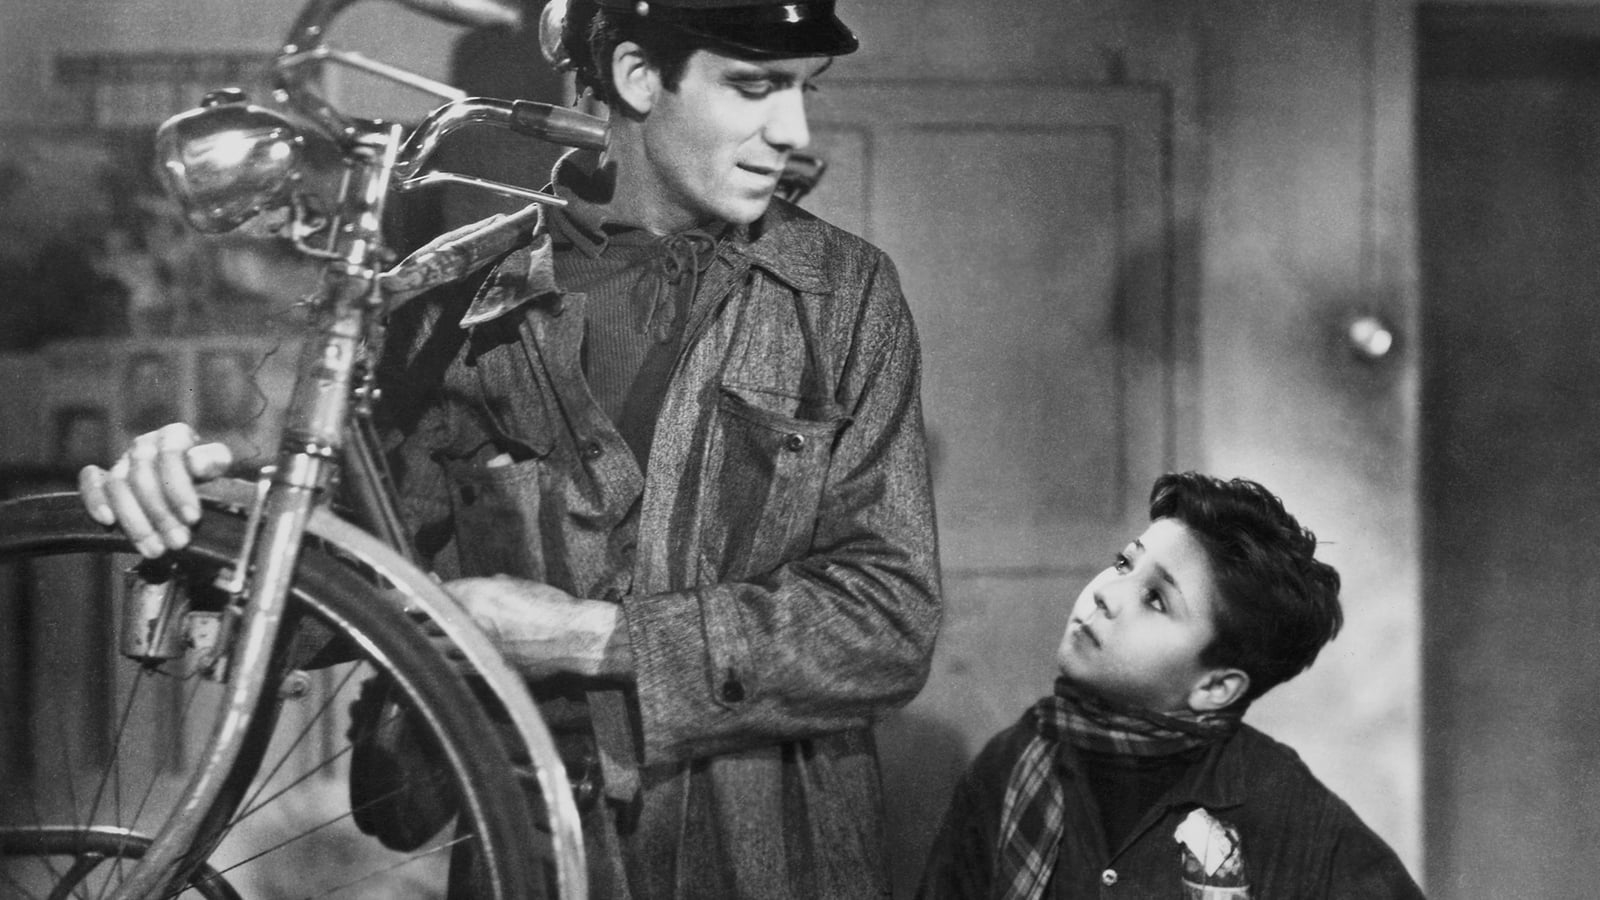 Bicycle Thieves / Bicycle Thieves (1948)